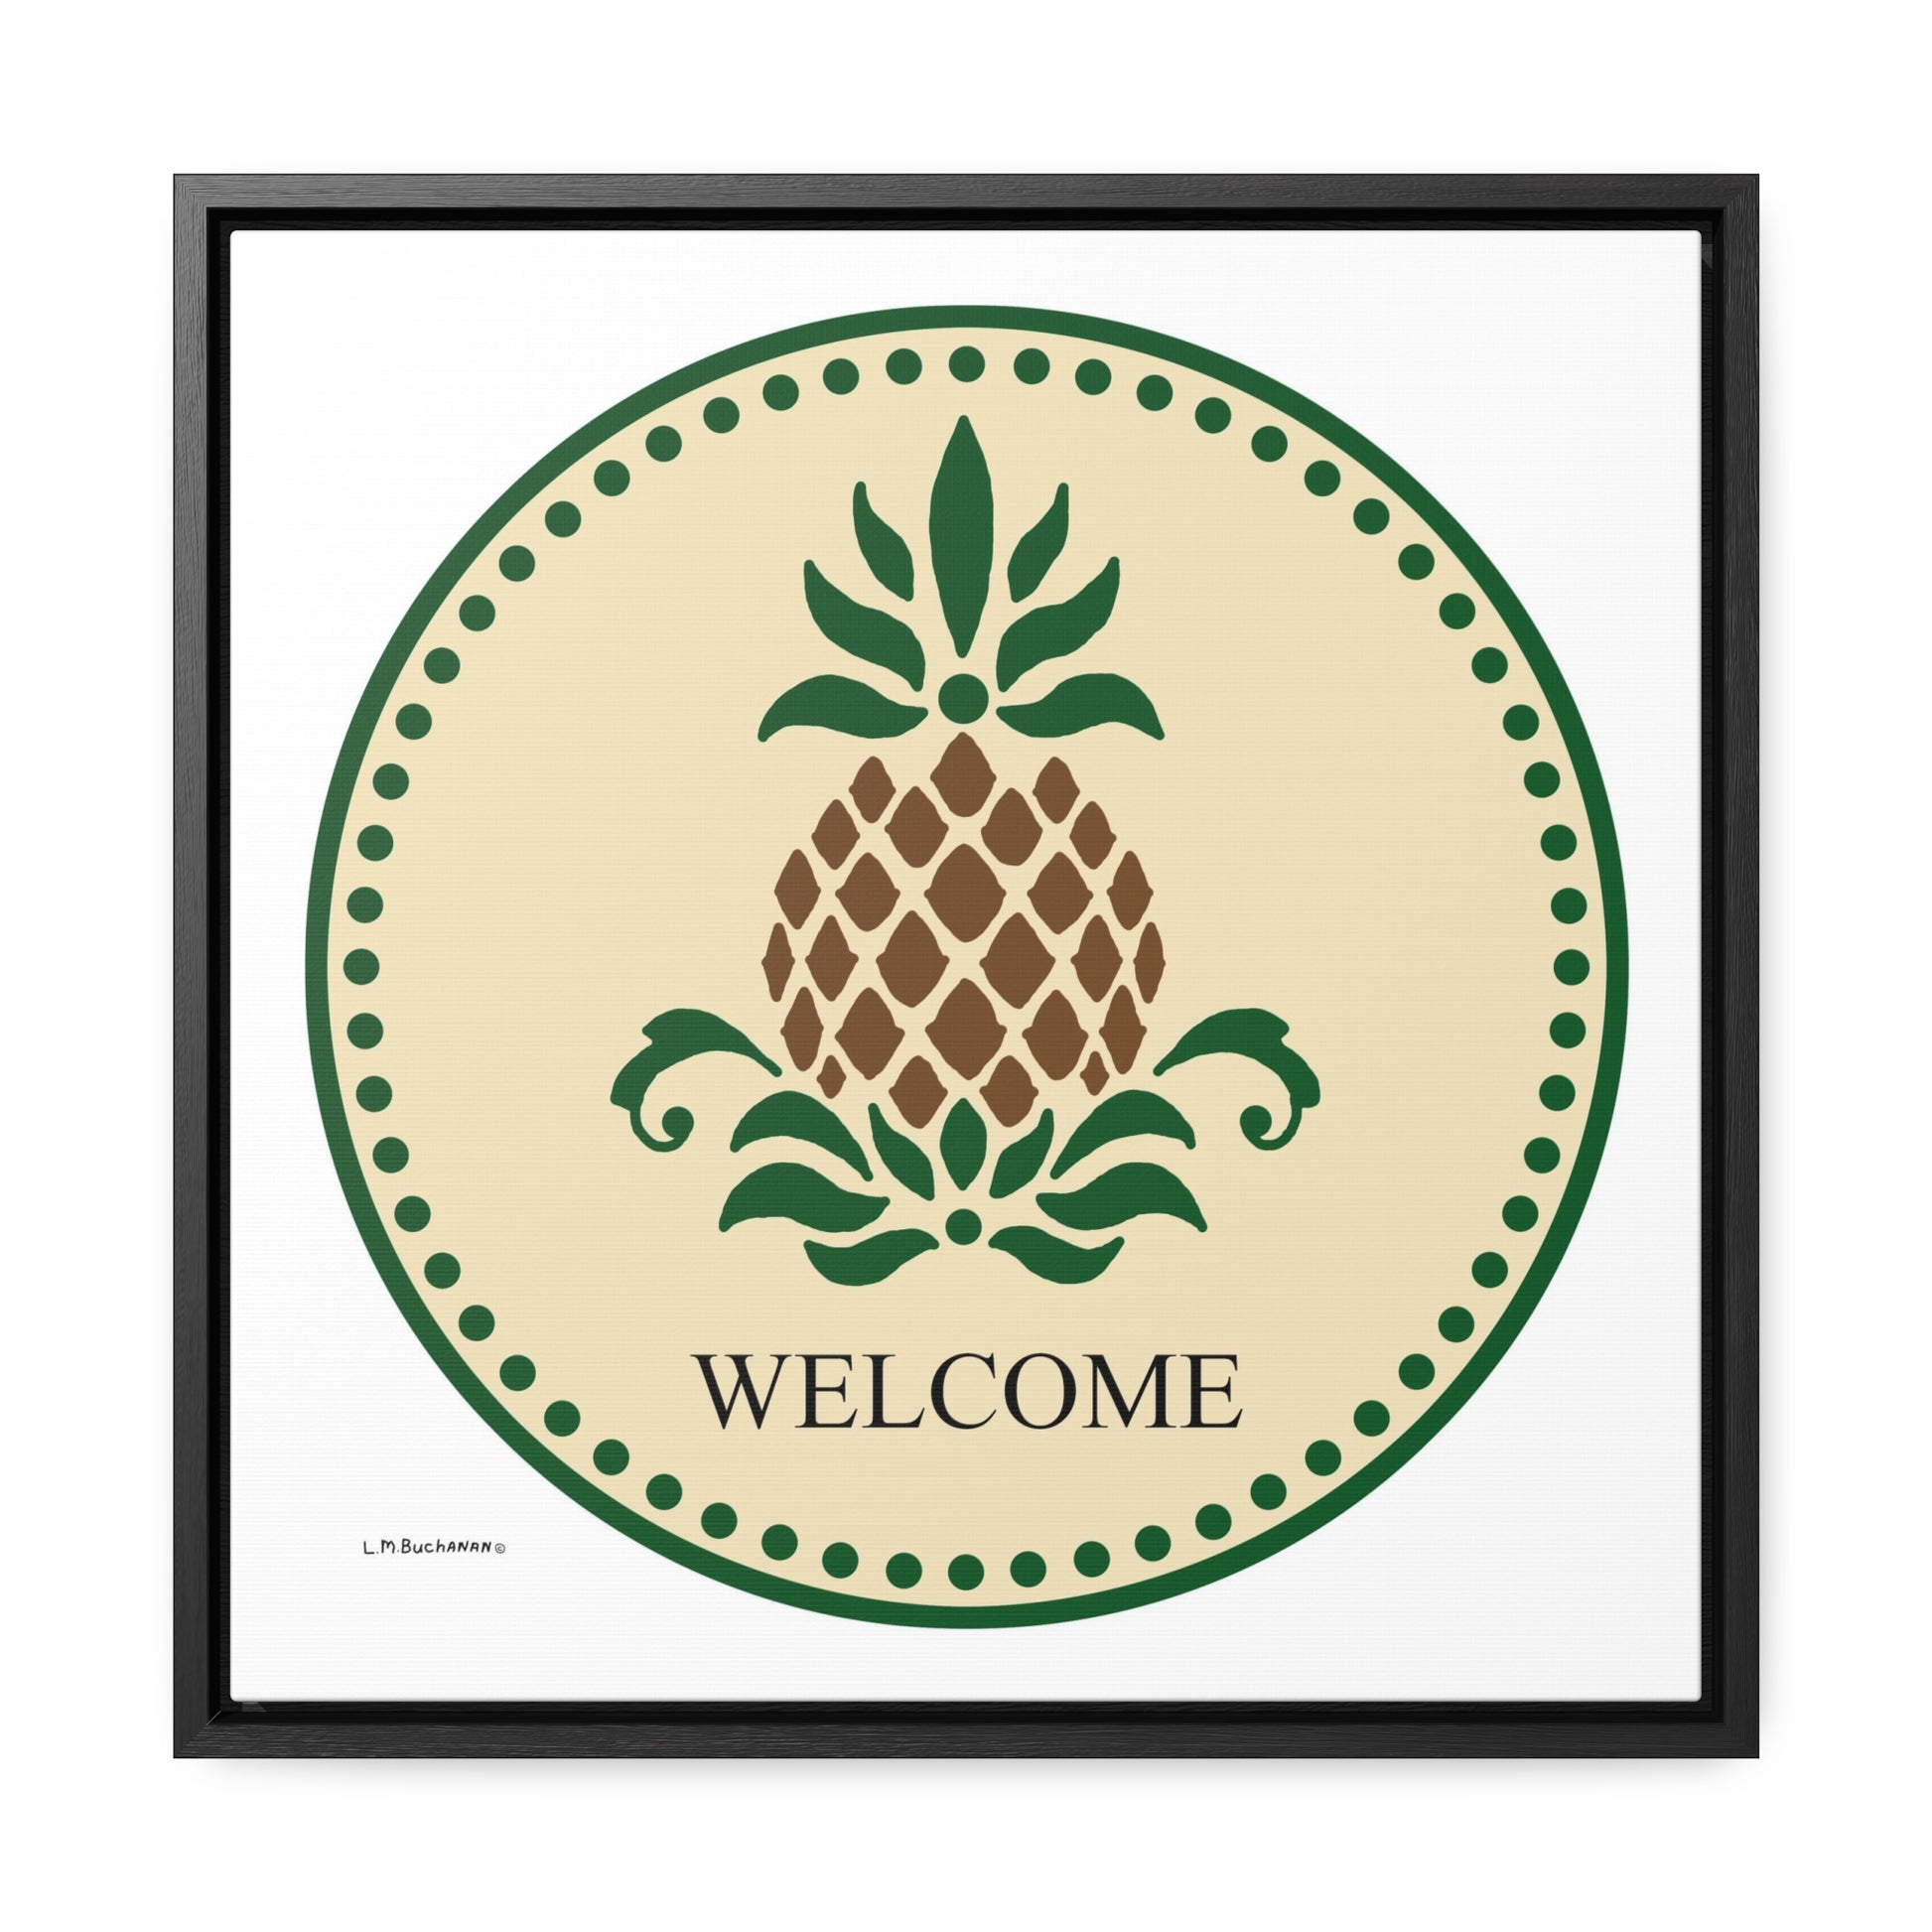 The Welcome Folk Art Design Gallery Wrapped Art Print is a reproduction of a fine art design by artist Lee M. Buchanan. The pineapple has long been a symbol of welcome and hospitality. Hang this stunning print on your wall and say "Welcome!" to all who visit and enjoy your special hospitality.